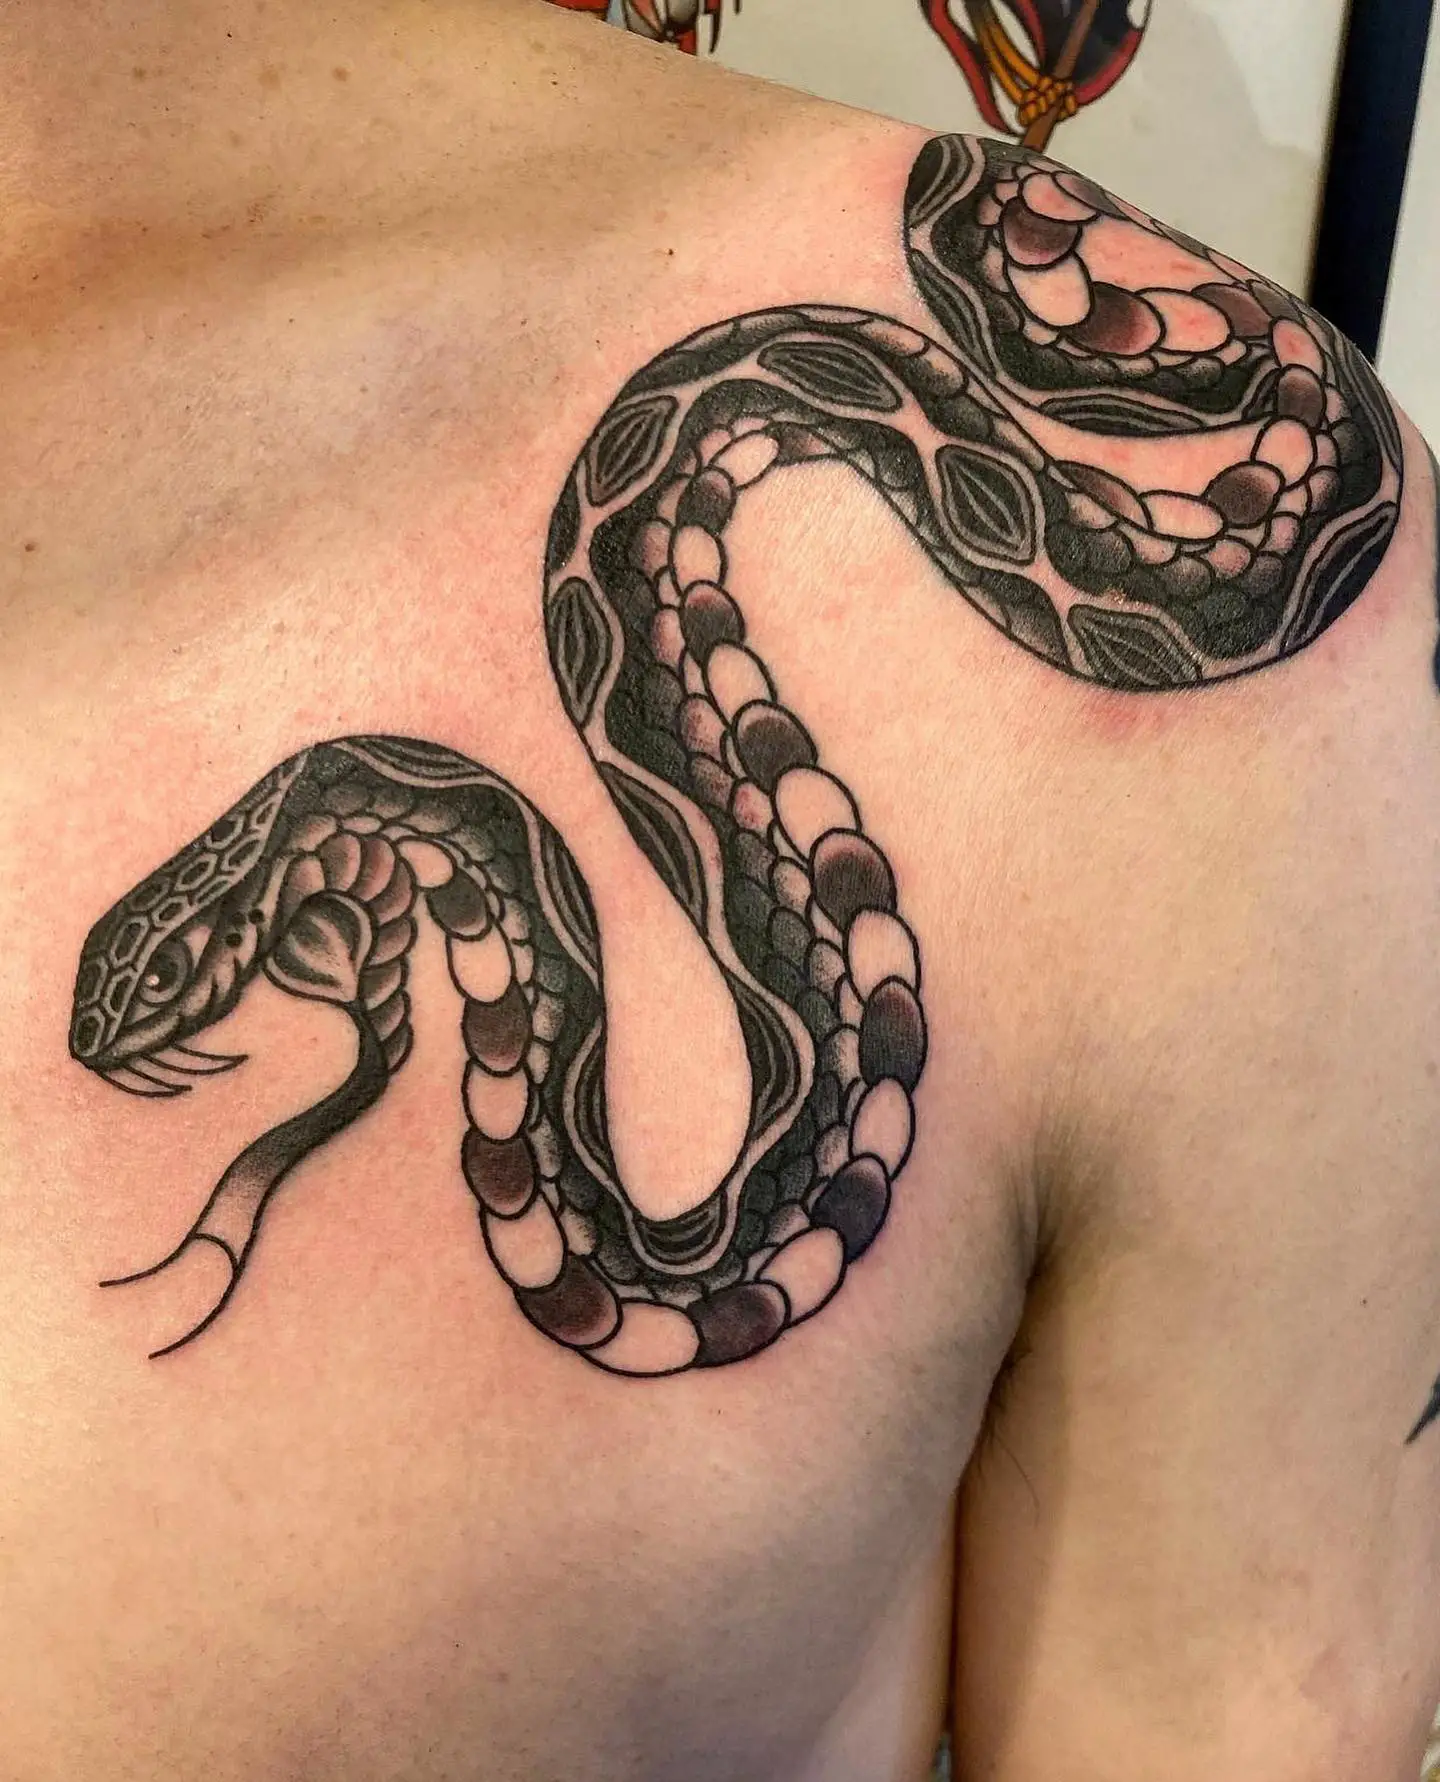 85 Mind-blowing Snake Tattoos For Chest That Are Difficult To Ignore